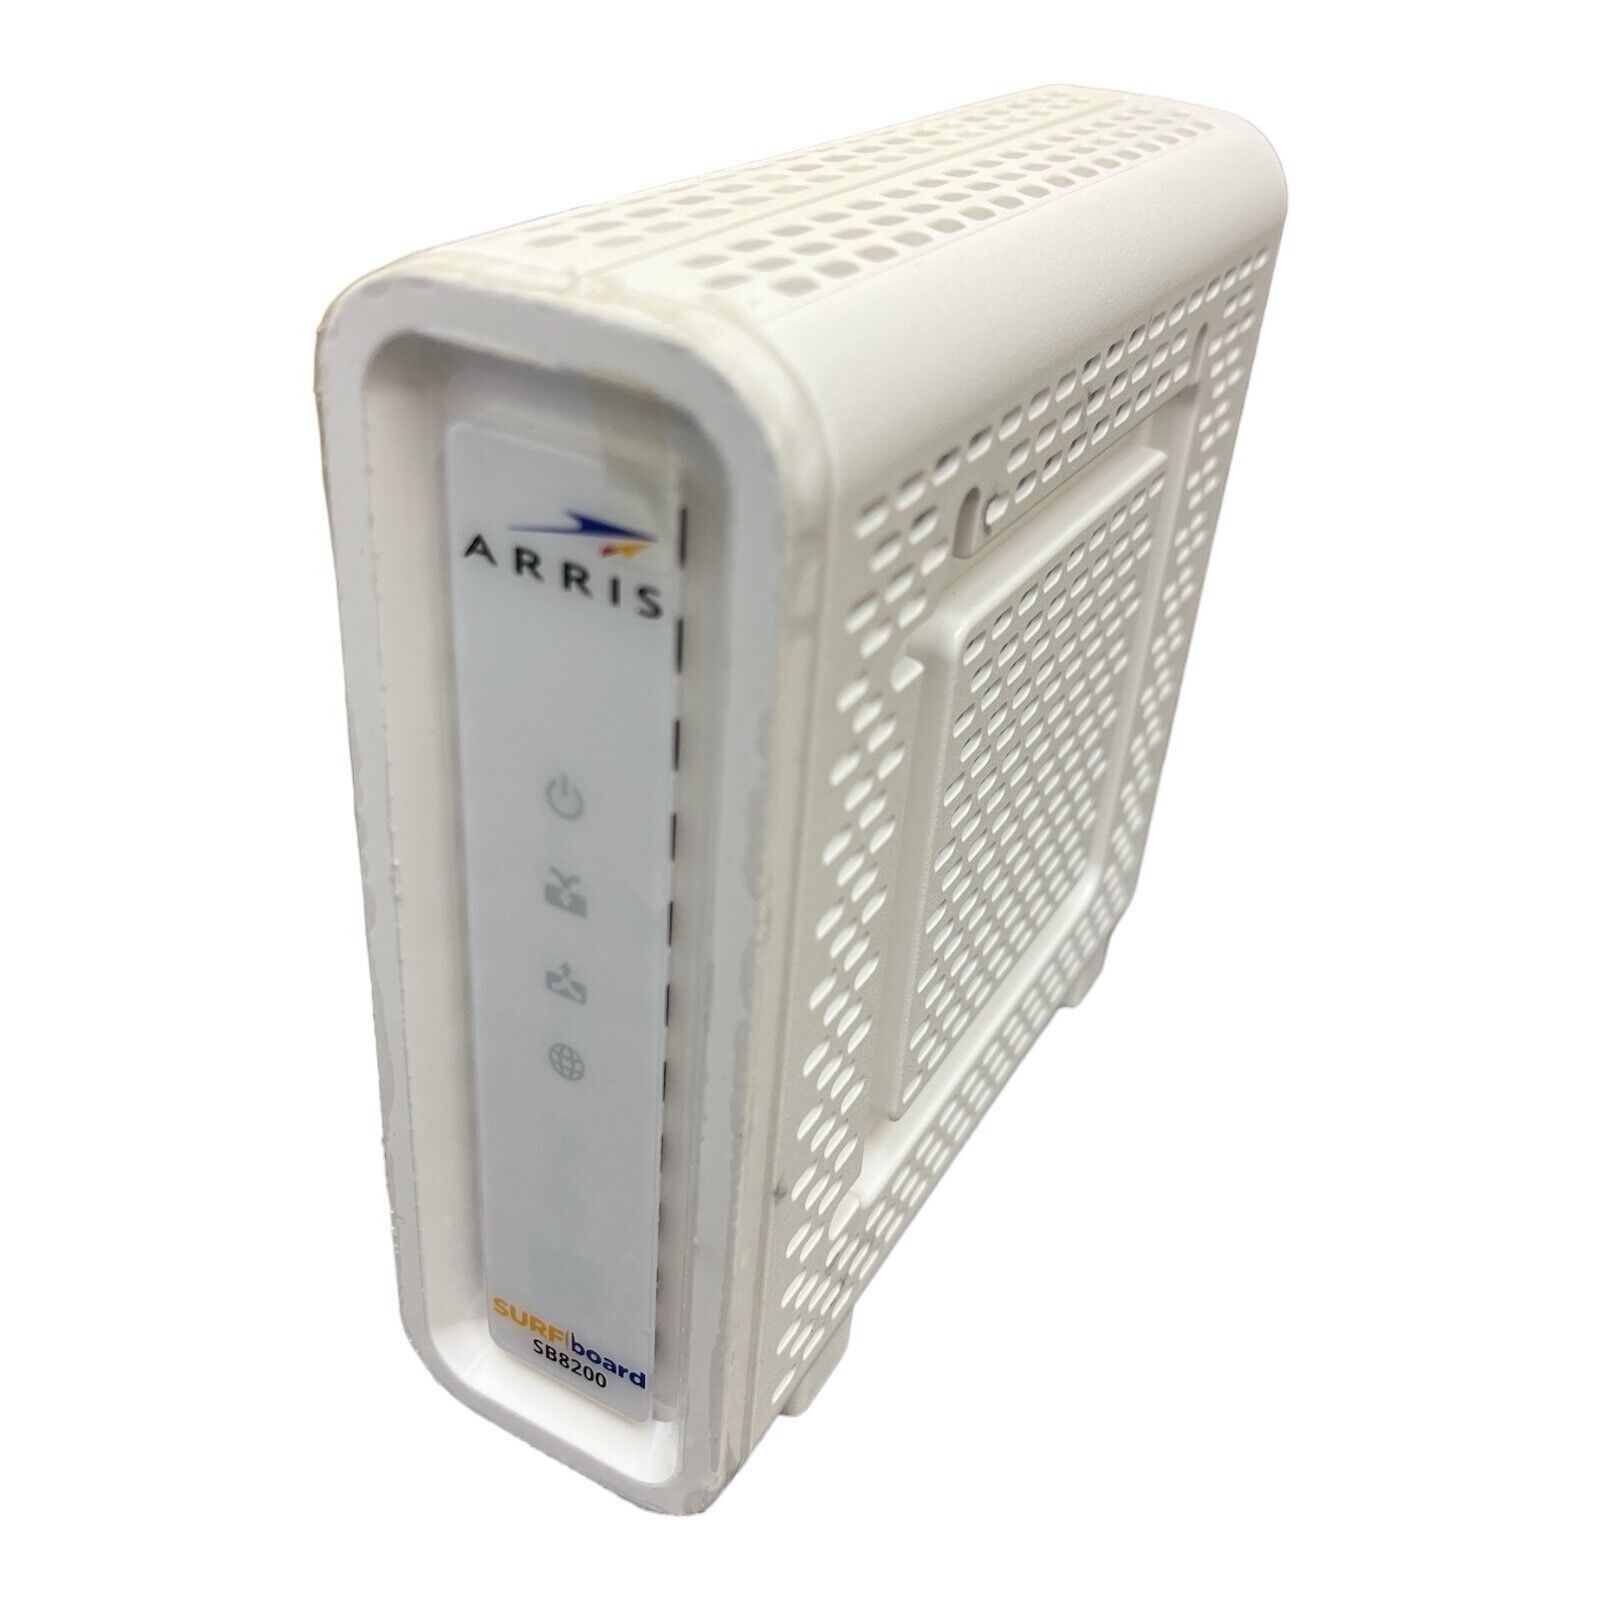 Arris Surfboard SB8200 Docsis 3.1 Cable Modem 10Gbps White Used 